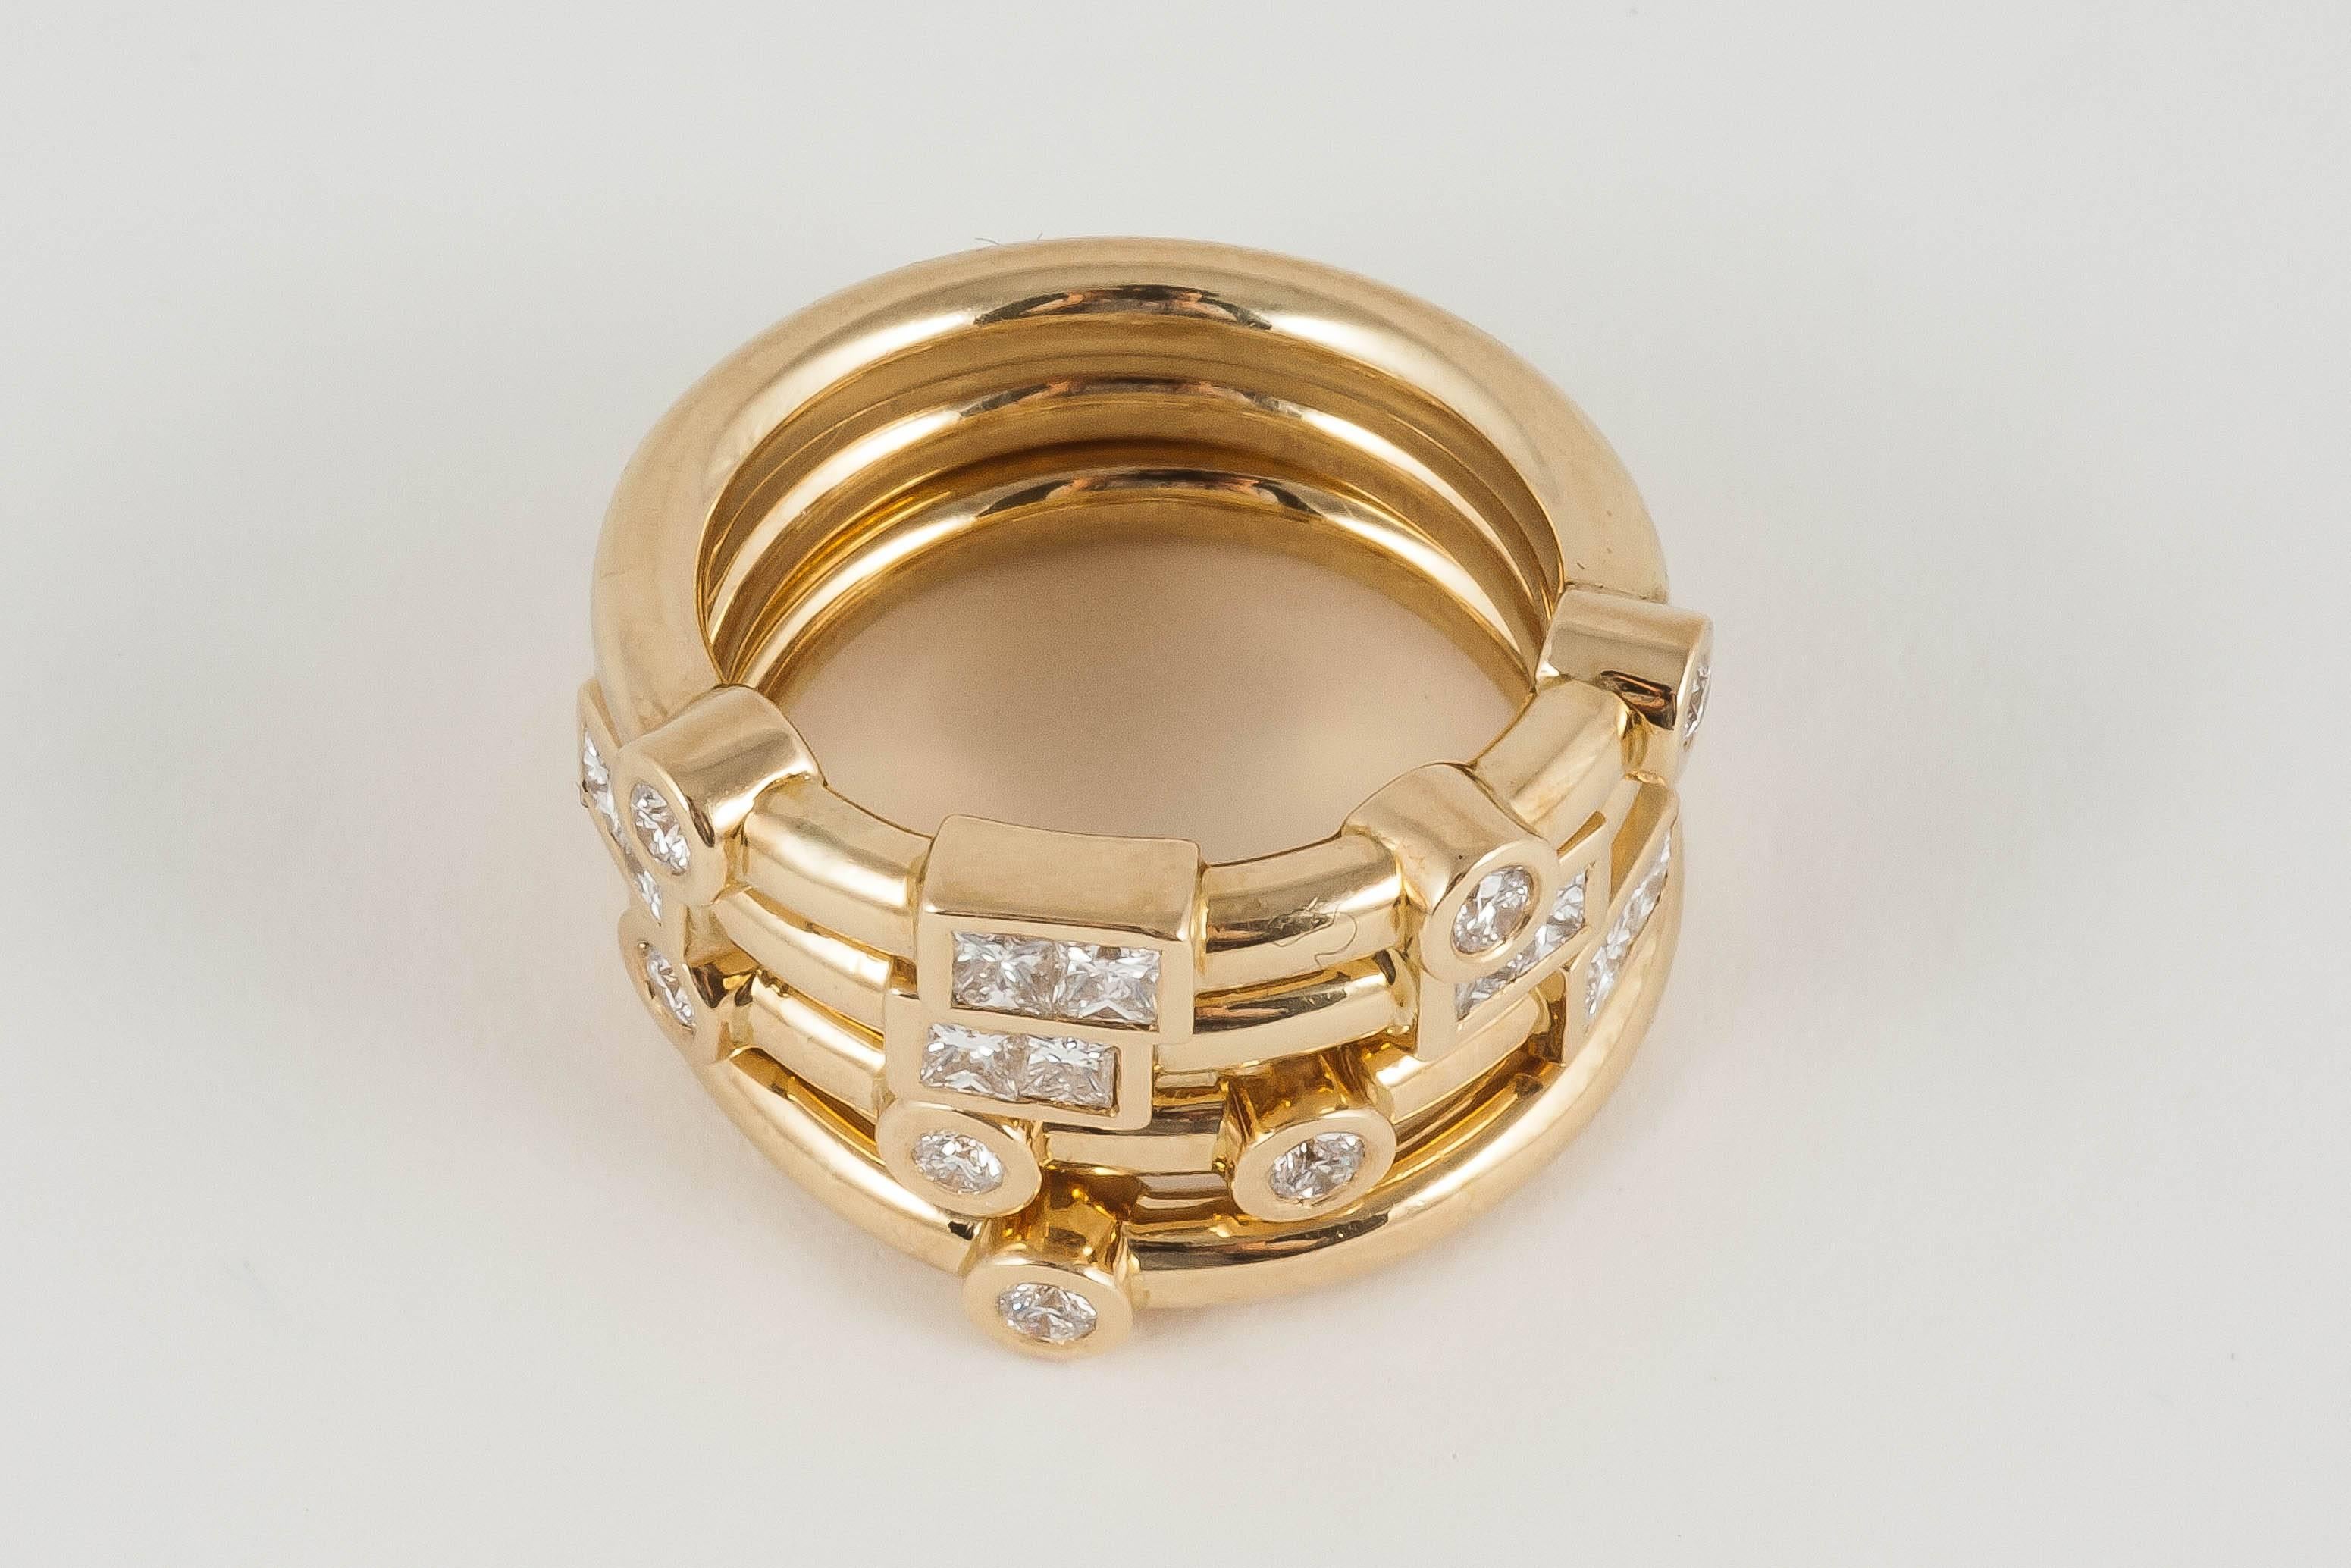 code by Edge uses the dots and dashes of Morse Code to conceal hidden messages within beautiful jewellery. The 'LOVE' combination is a suite of 4x stacking rings hand-made from solid 18k Yellow Gold and set with the rarest premium cut Russian